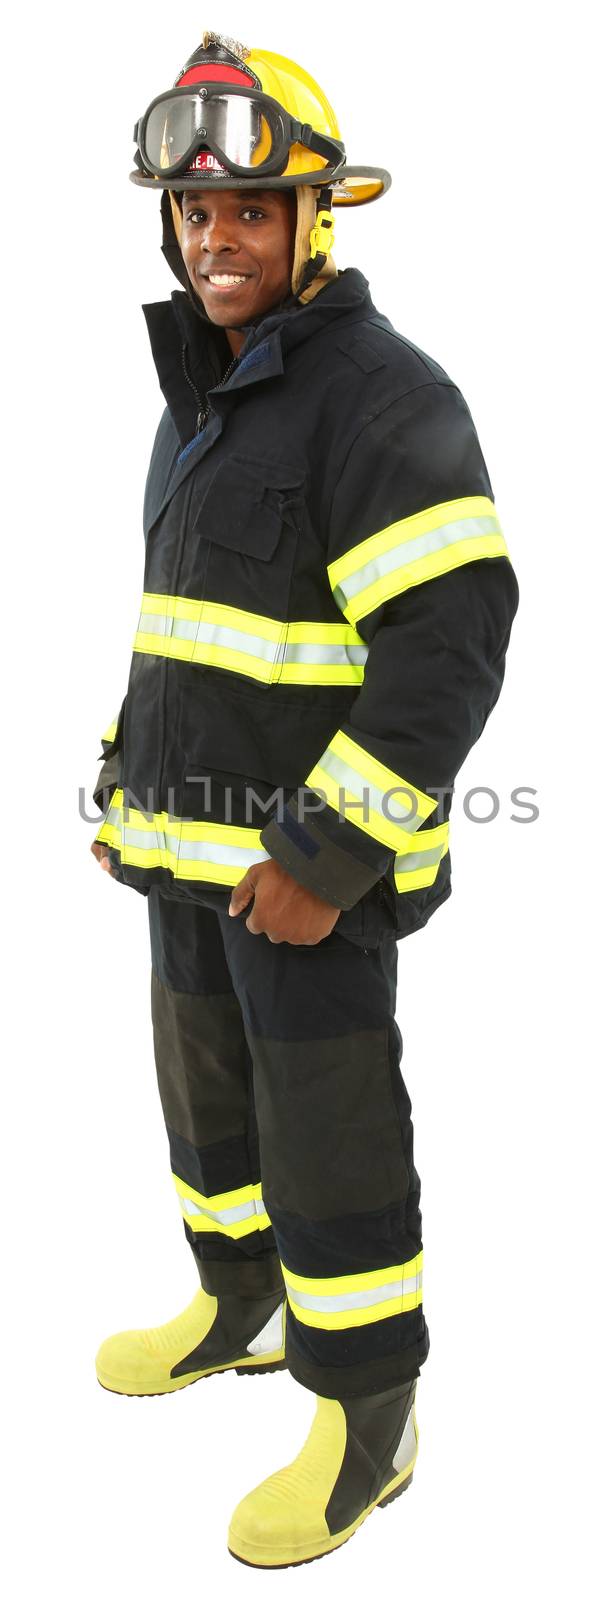 Attractive black middle aged man in fire fighter's uniform with  by duplass